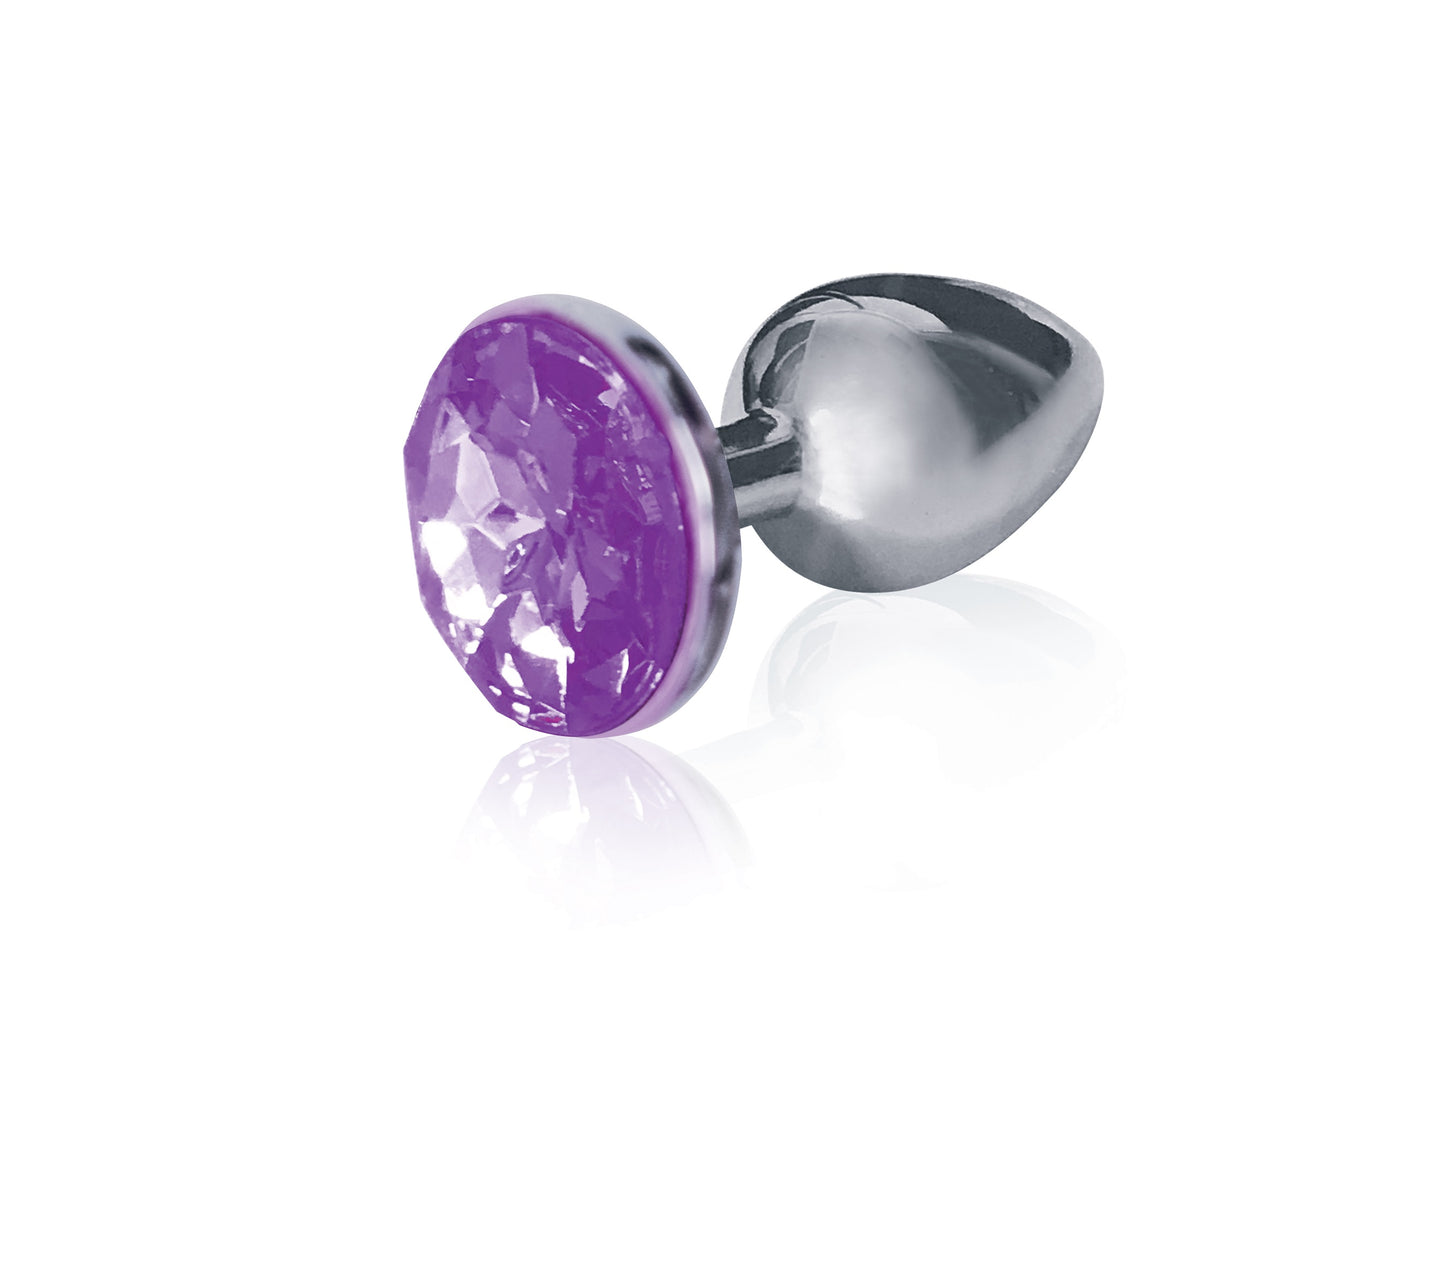 The Silver Starter Bejeweled Round - Pink or Purple